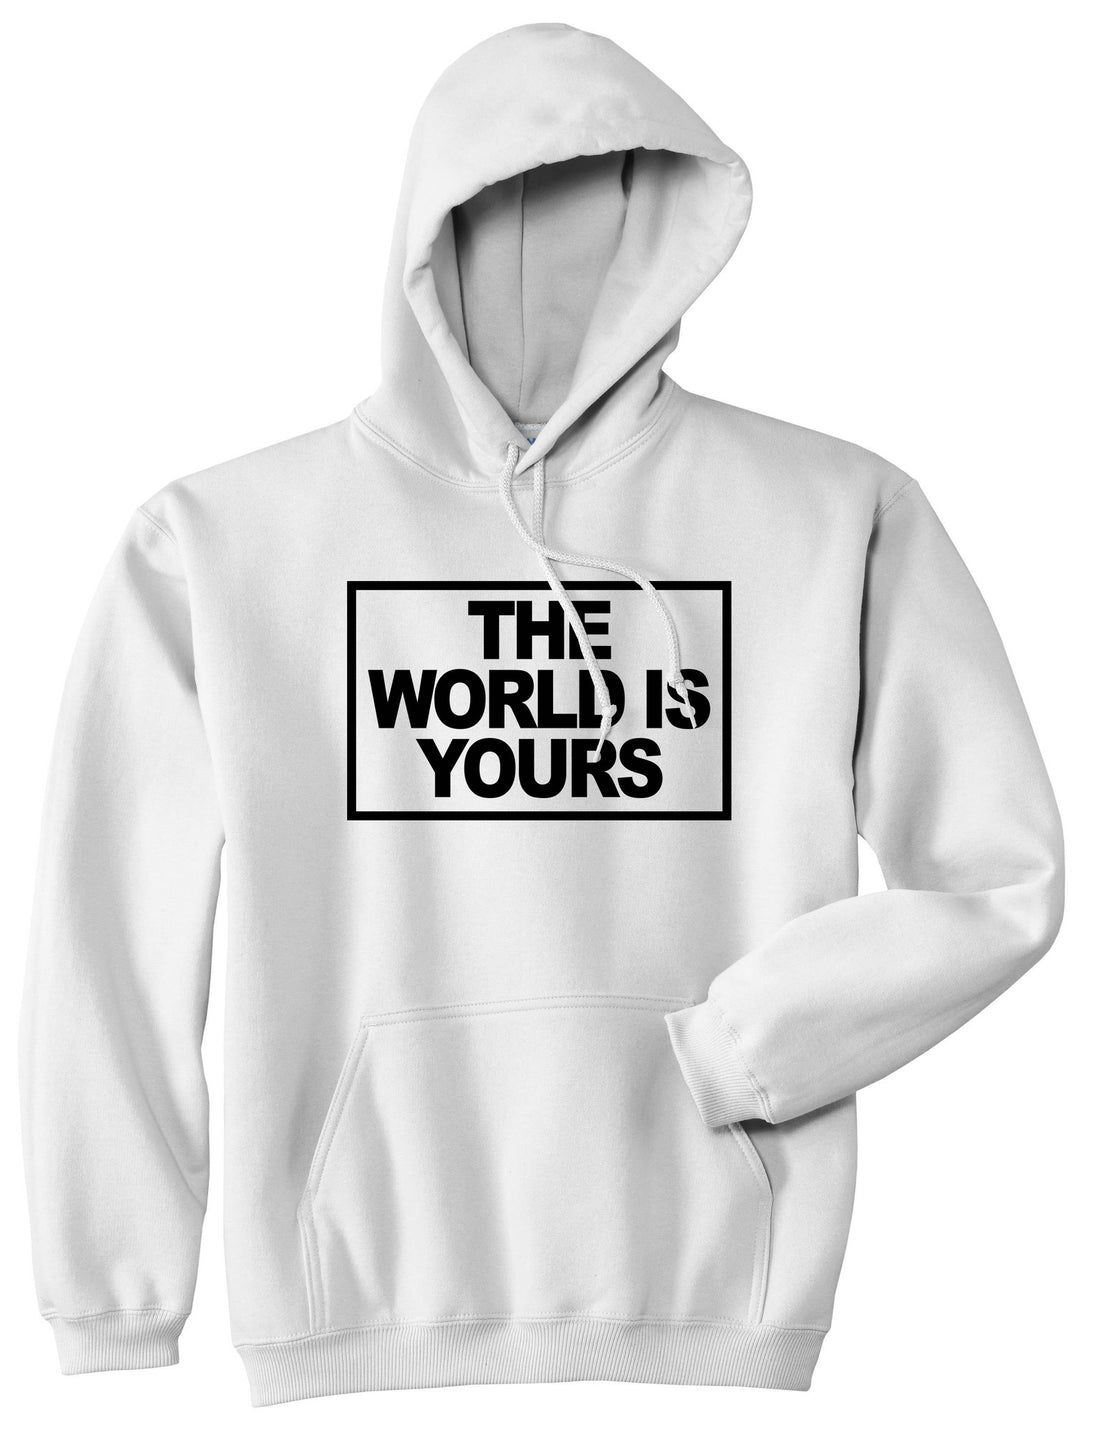 The World Is Yours Pullover Hoodie in White By Kings Of NY